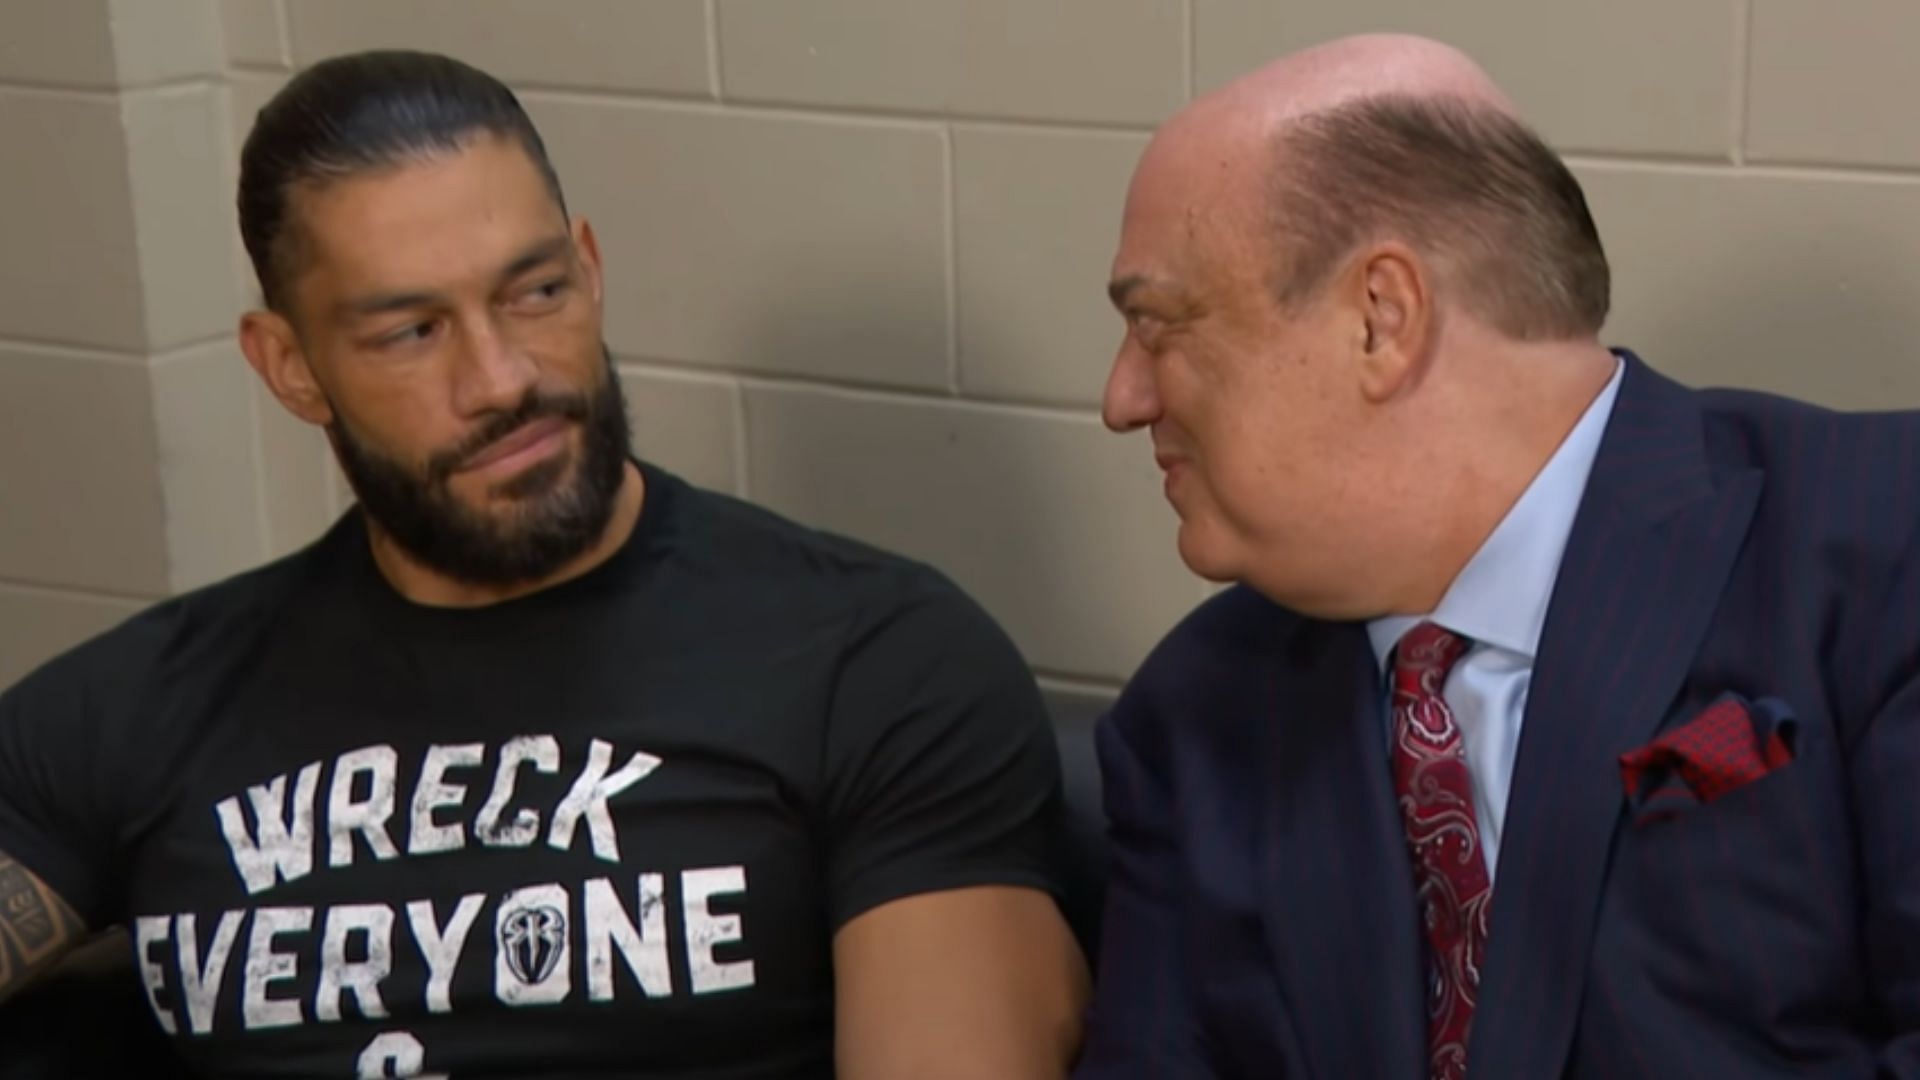 Roman Reigns (left) and Paul Heyman (right)